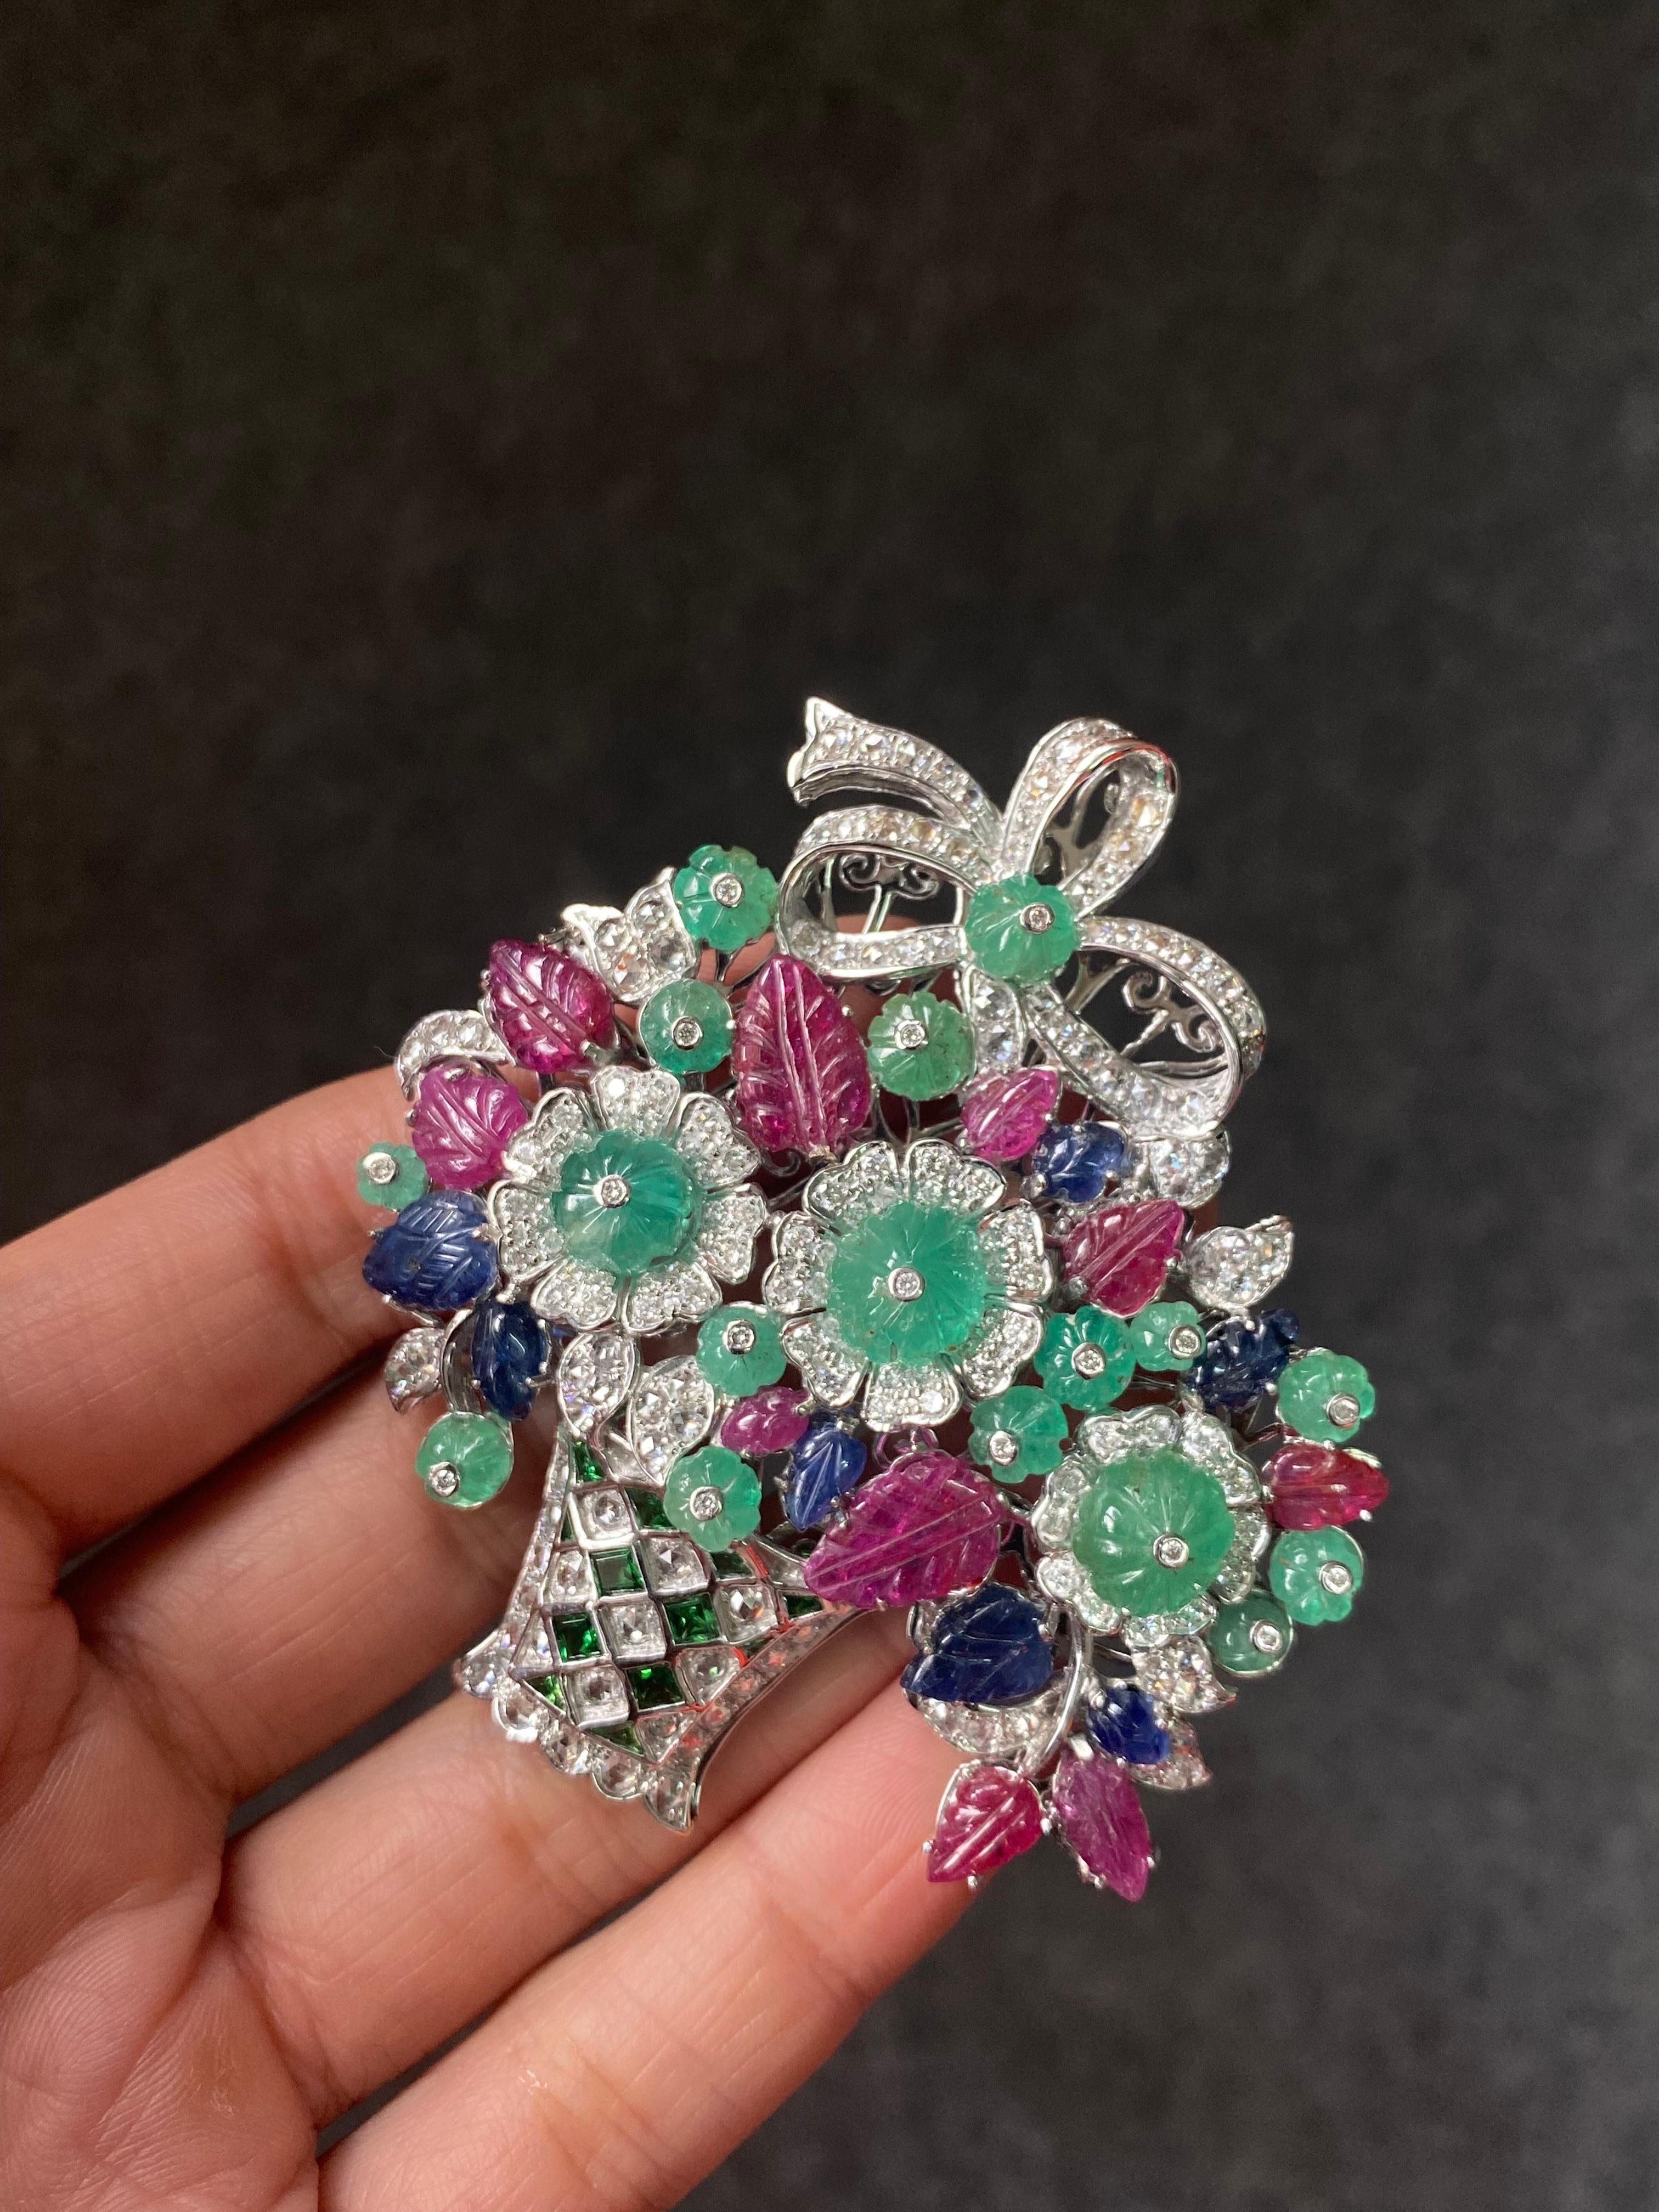 A beautiful art-deco inspired tutti frutti brooch depicting a flower vase, with 11 carat natural Ruby, 6 carat natural Sapphire and 19.2 carat natural Emeralds with 4.3 carats of White Diamonds all set in solid 18K White Gold. 
We provide free